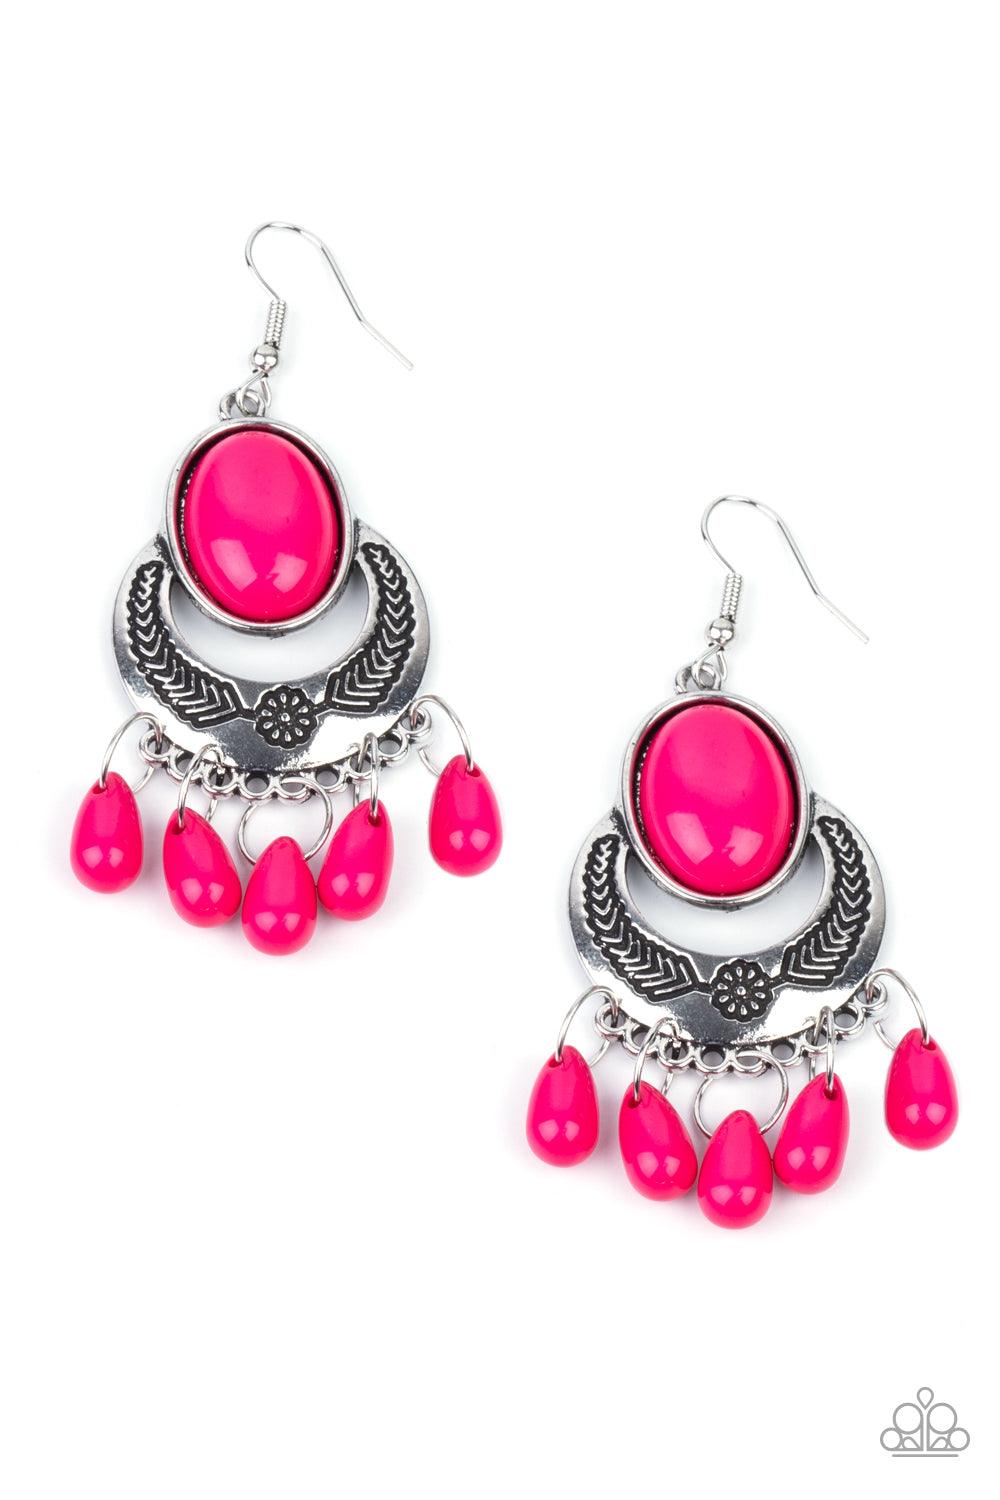 Paparazzi Accessories Prairie Flirt - Pink Raspberry Sorbet teardrop beads dance from the bottom of a half-moon silver frame stamped in floral detail, creating a flirty fringe. An oversized Raspberry Sorbet oval bead crowns the top of the frame for a powe